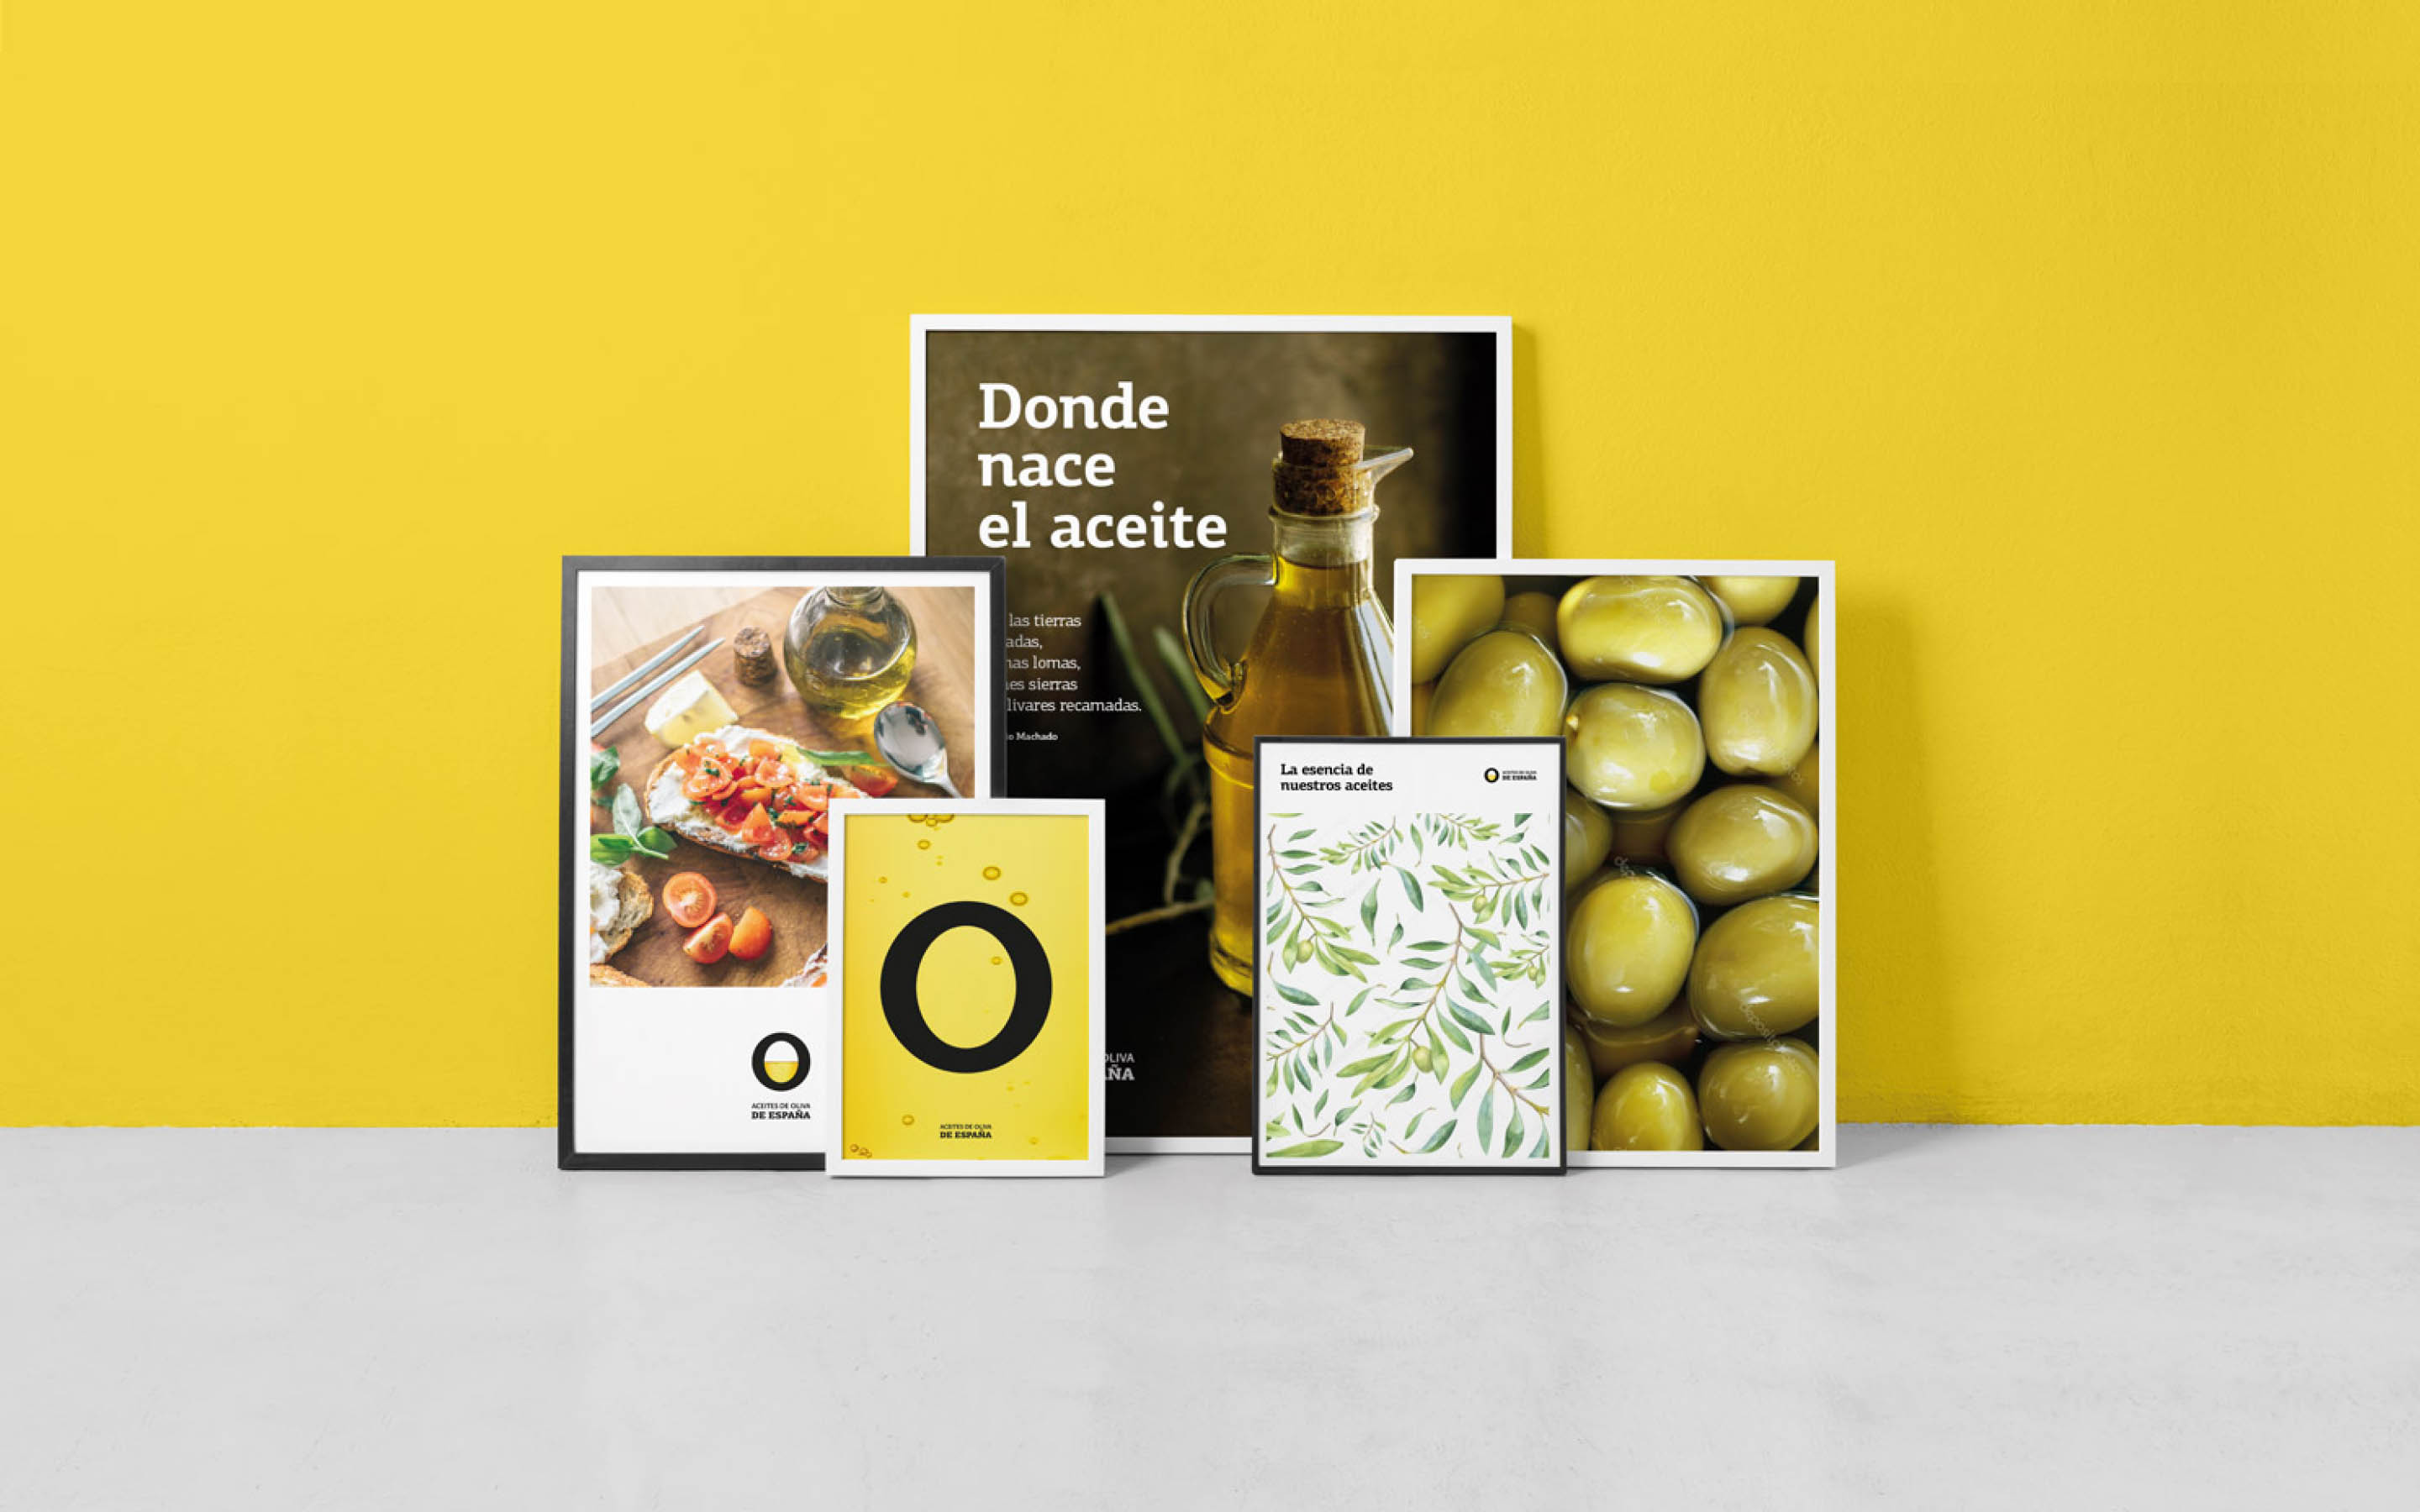 Aceites de Oliva de España is a non-profit interprofessional organization that acts as a prescriber of Spanish olive oil and which, in order to achieve international relevance, needed a brand that represents the essence of an entire cuisine.
